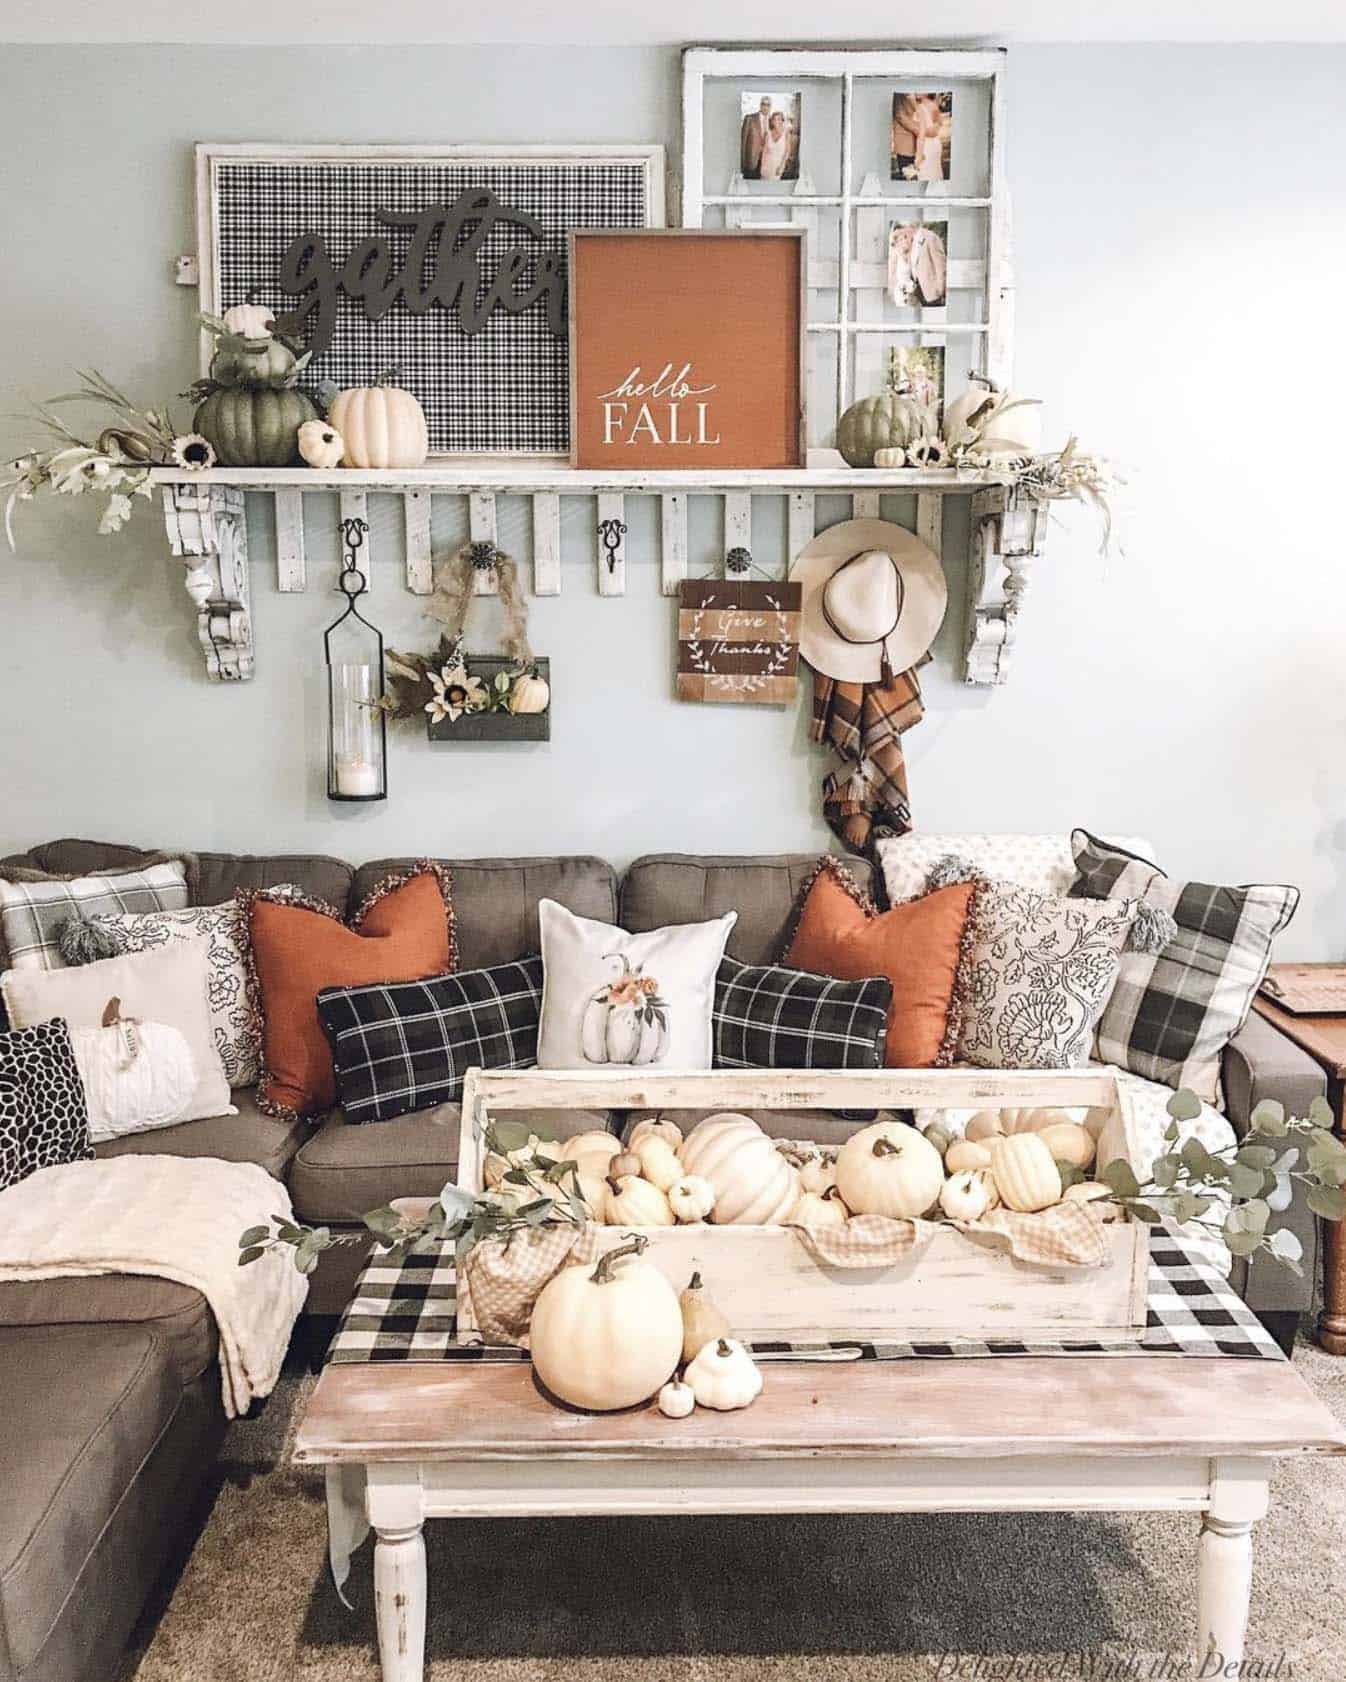 farmhouse-style living room with rustic fall signs, pumpkins, and cozy pillows